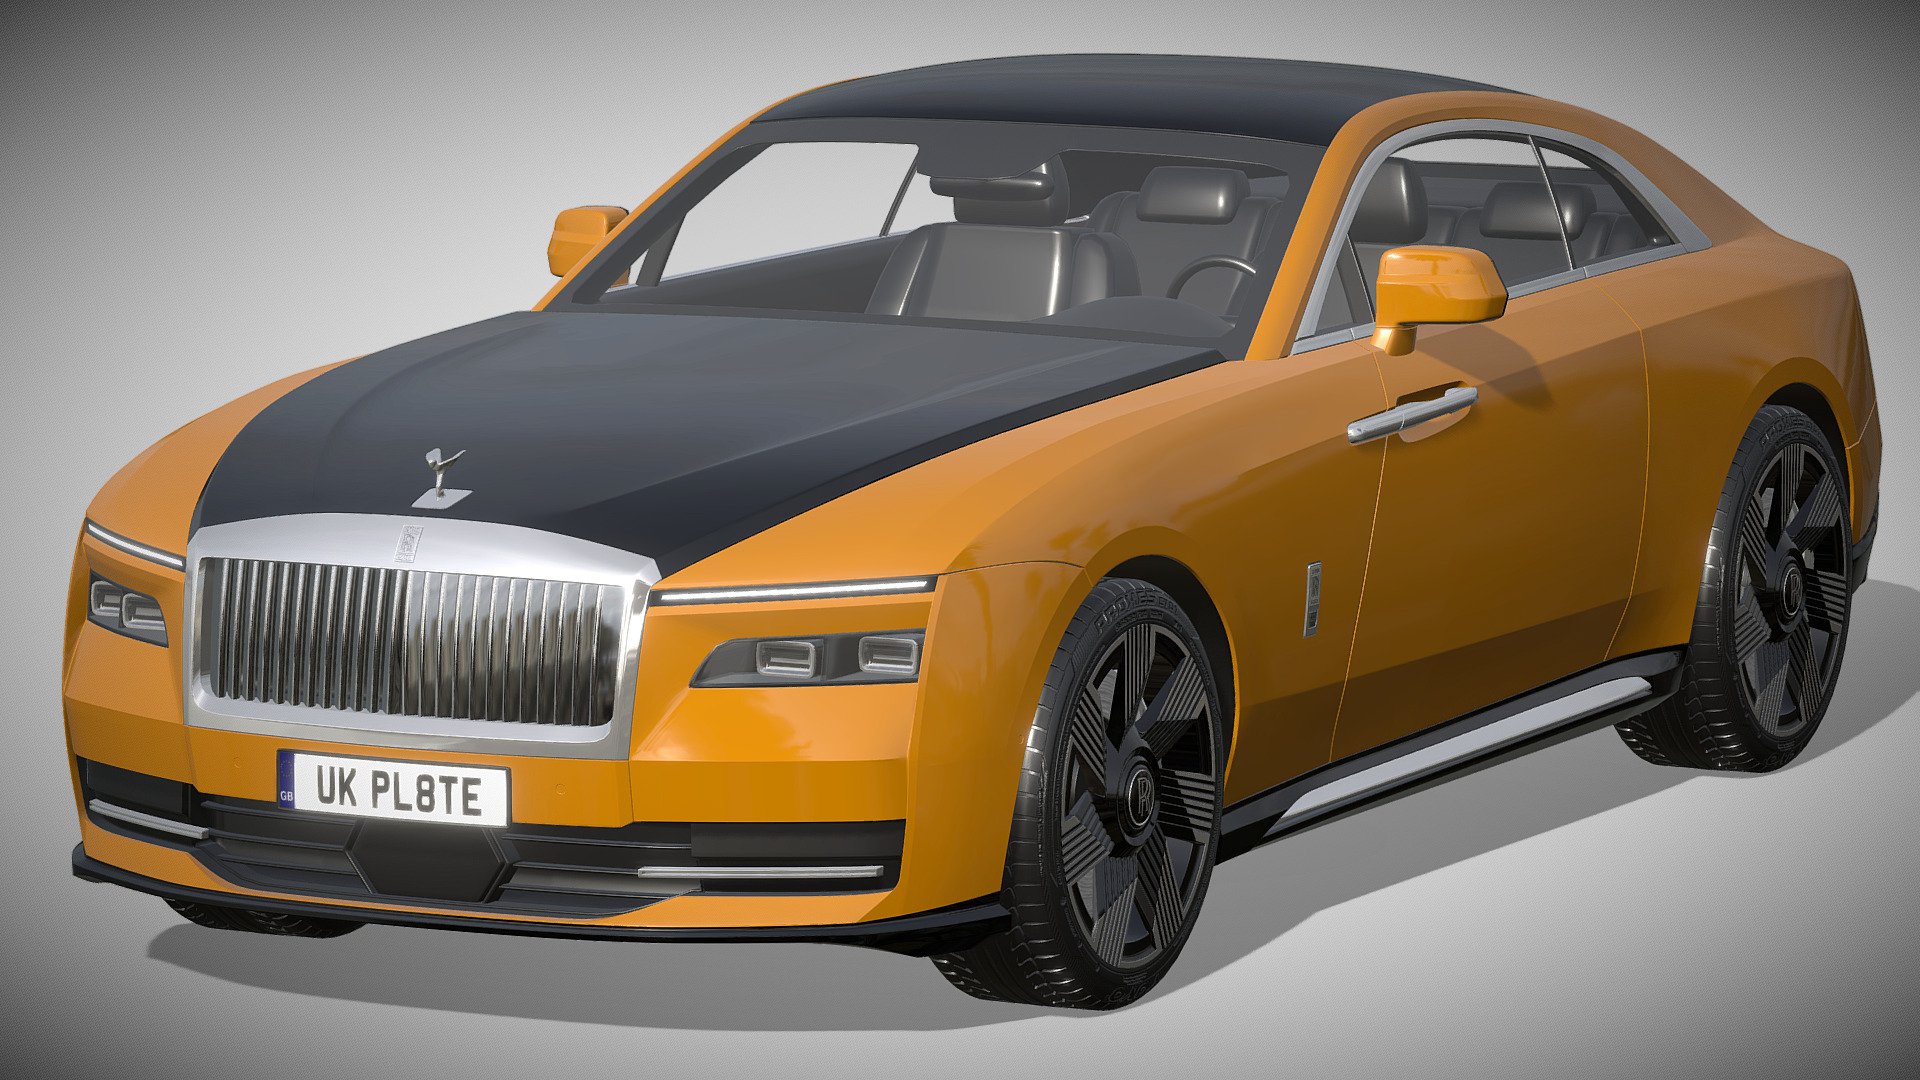 Rolls-Royce Spectre

https://www.rolls-roycemotorcars.com/en_GB/showroom/spectre.html

Clean geometry Light weight model, yet completely detailed for HI-Res renders. Use for movies, Advertisements or games

Corona render and materials

All textures include in *.rar files

Lighting setup is not included in the file! - Rolls-Royce Spectre - Buy Royalty Free 3D model by zifir3d 3d model